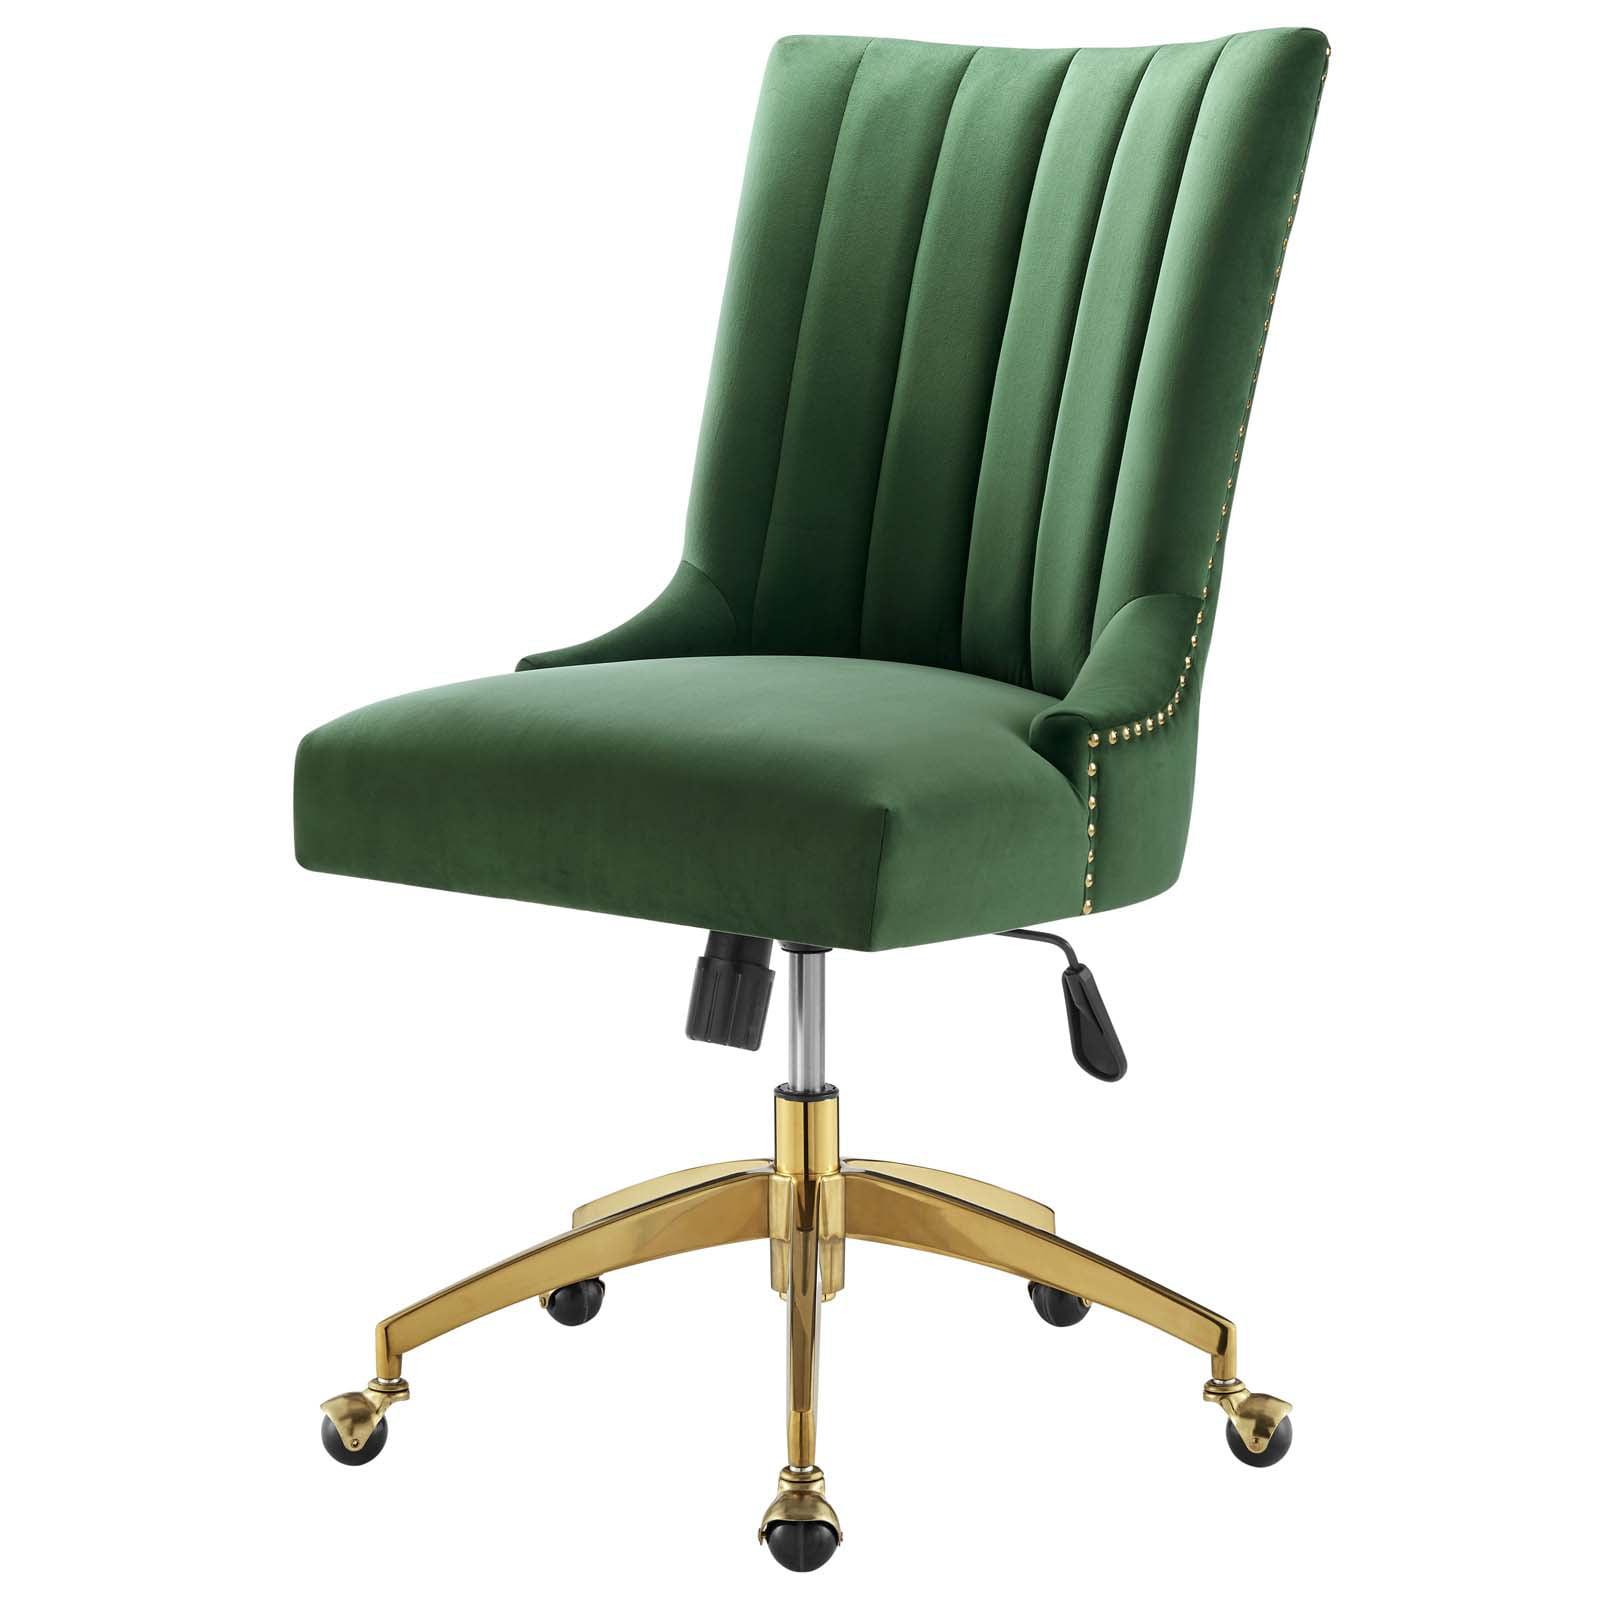 Ergonomic Executive Swivel Office Chair in Gold Emerald with Metal Base